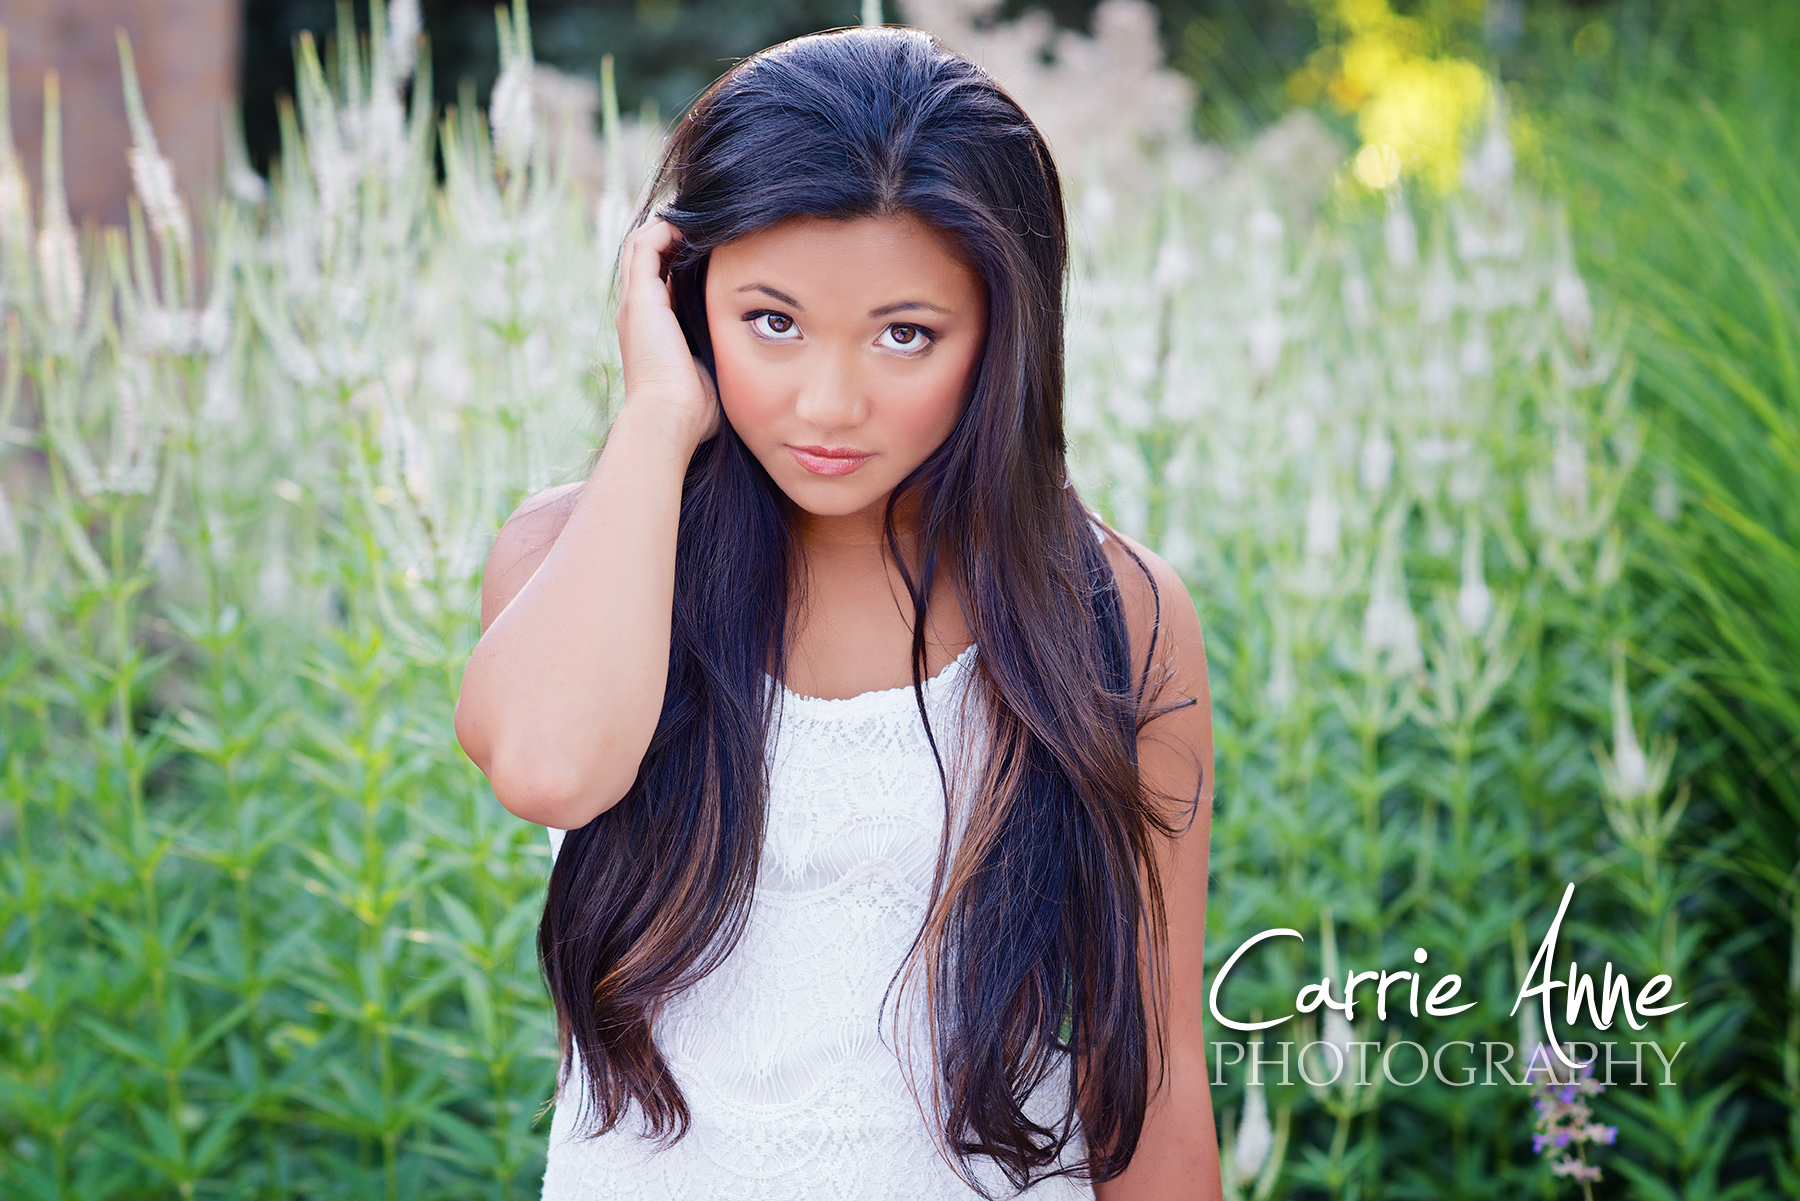 Grand Rapids Senior Pictures : Carrie Anne Photography